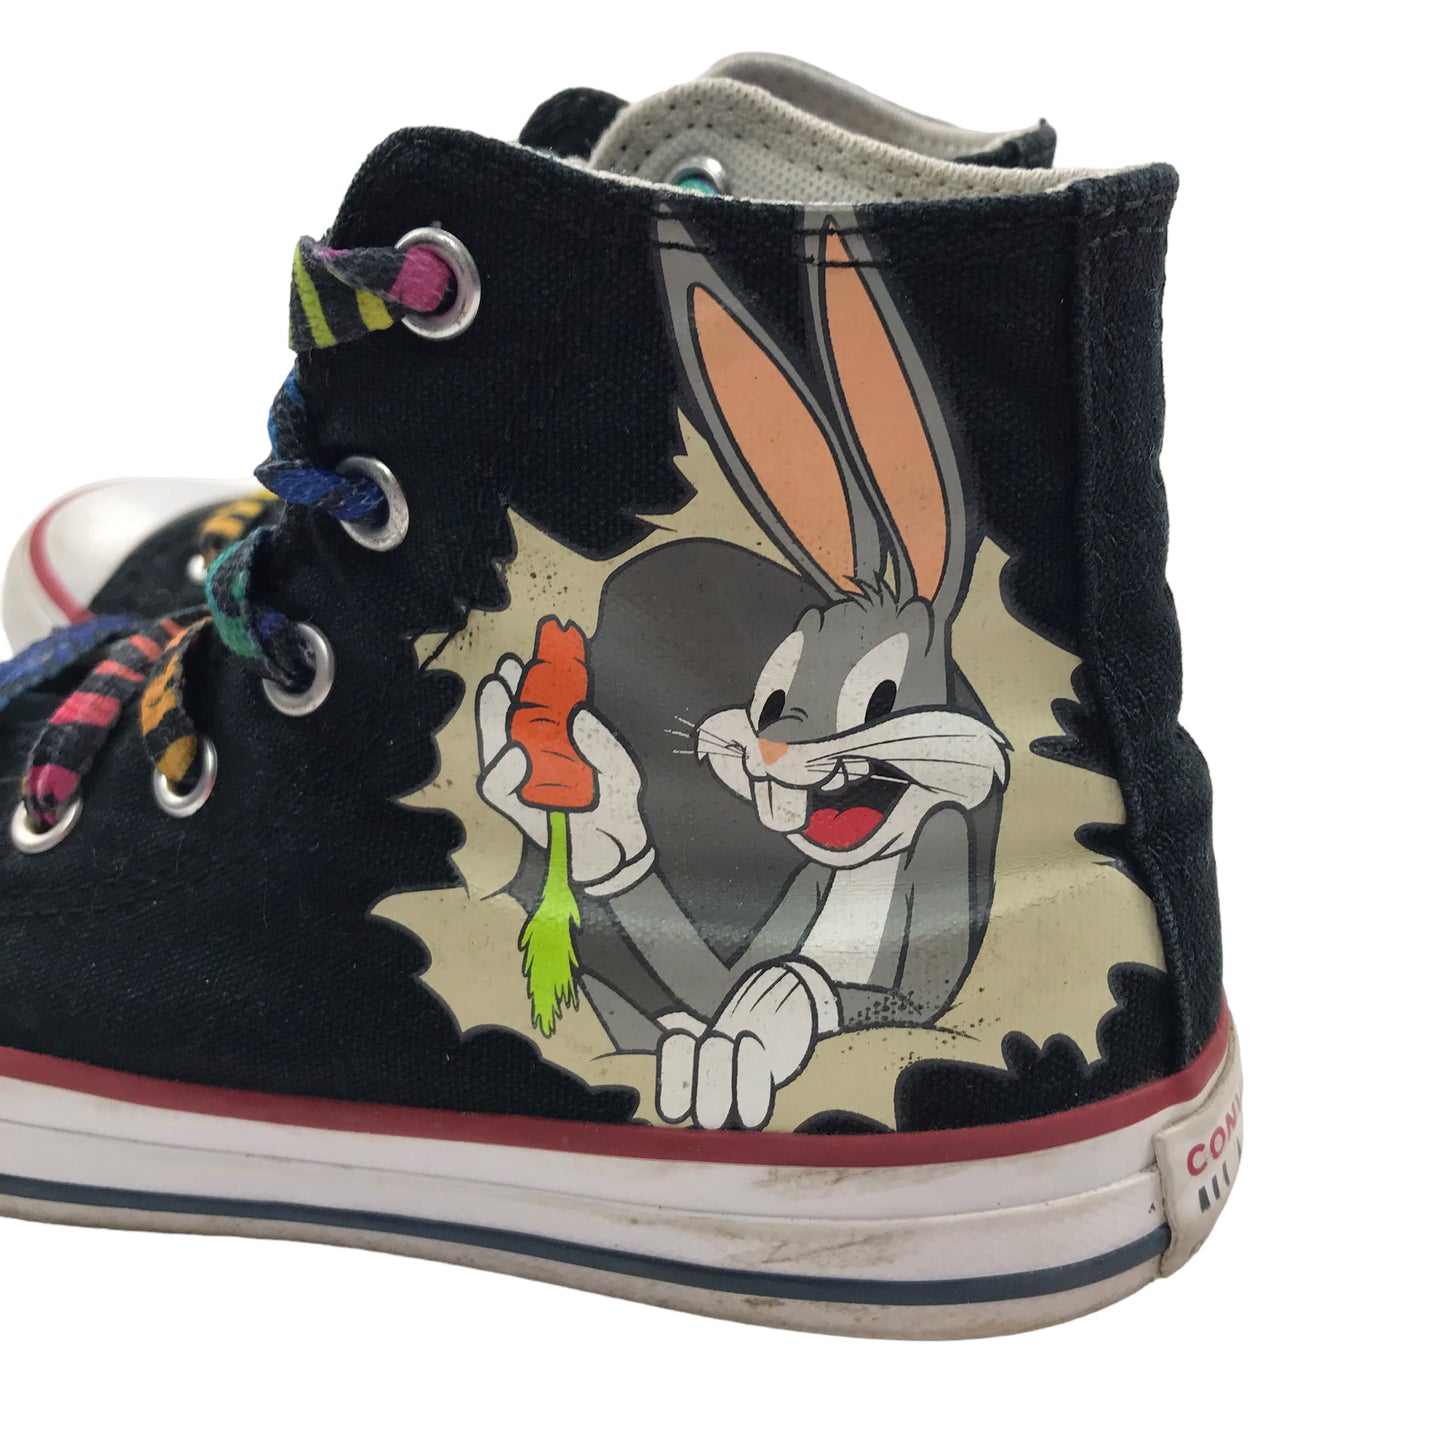 Converse All Star Bugs Bunny High Tops Trainers Shoe Size 13 junior